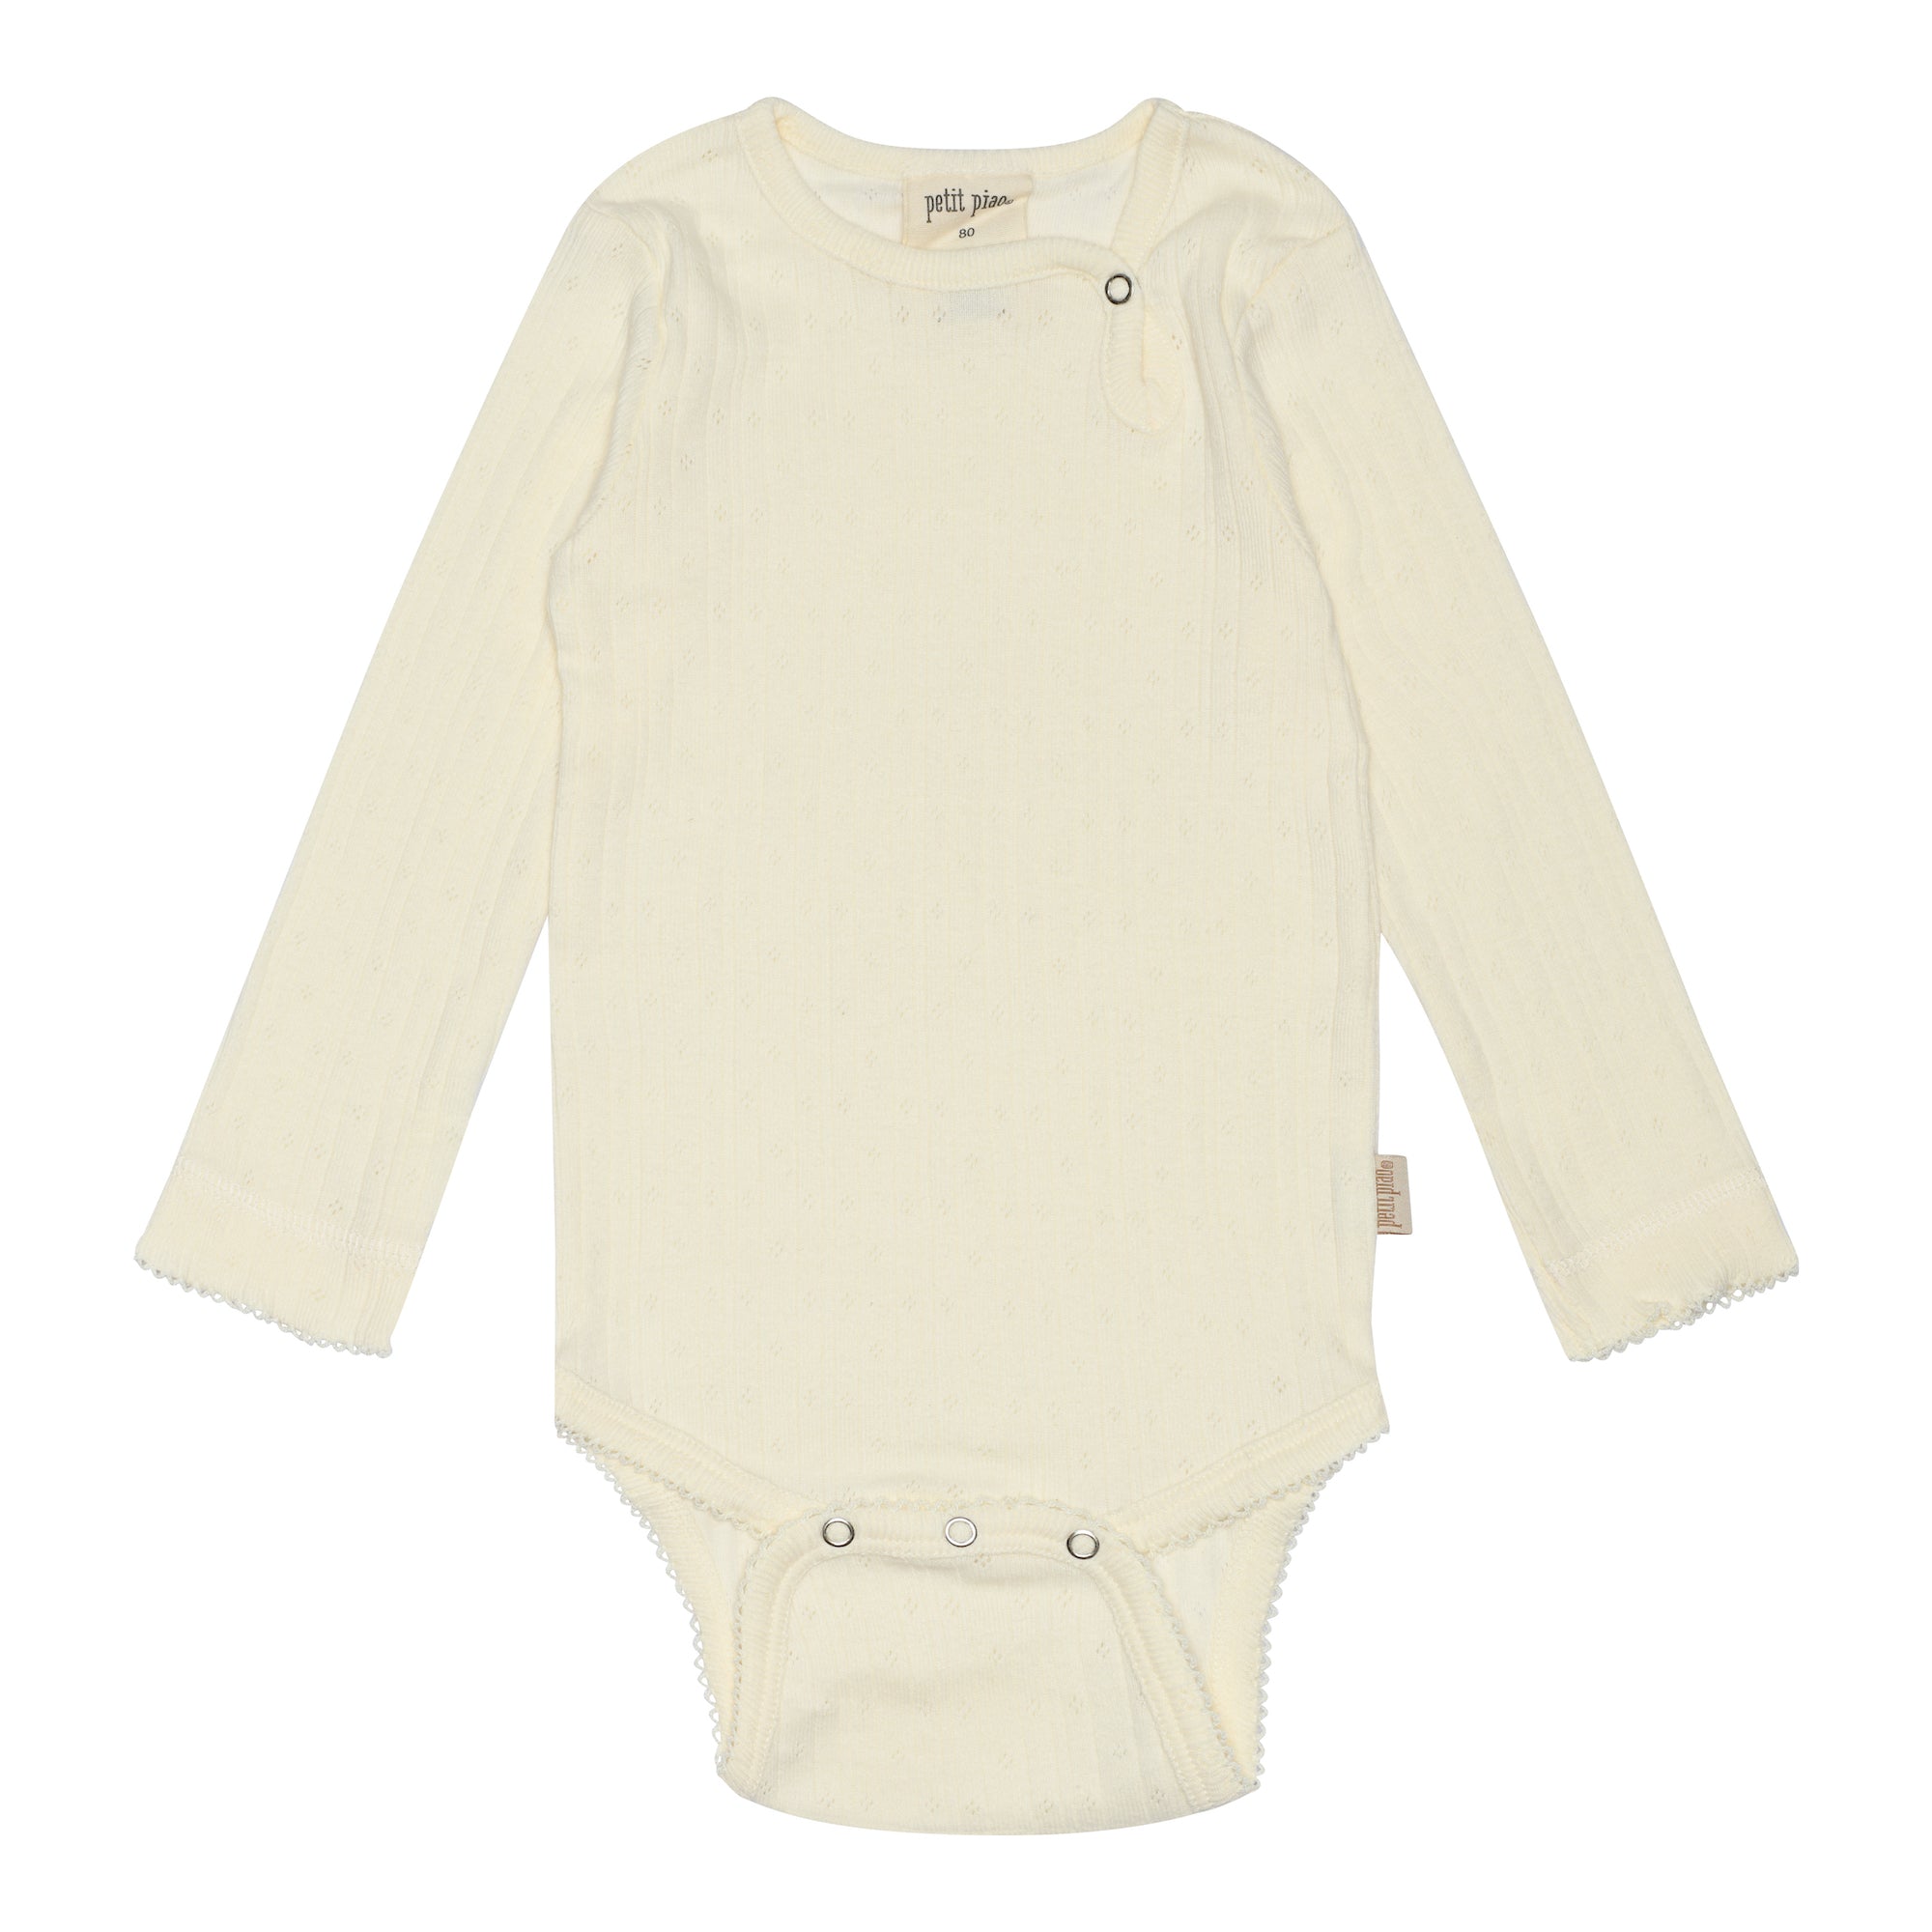 Petit Piao - Body LS Pointelle, PP1615 - Offwhite